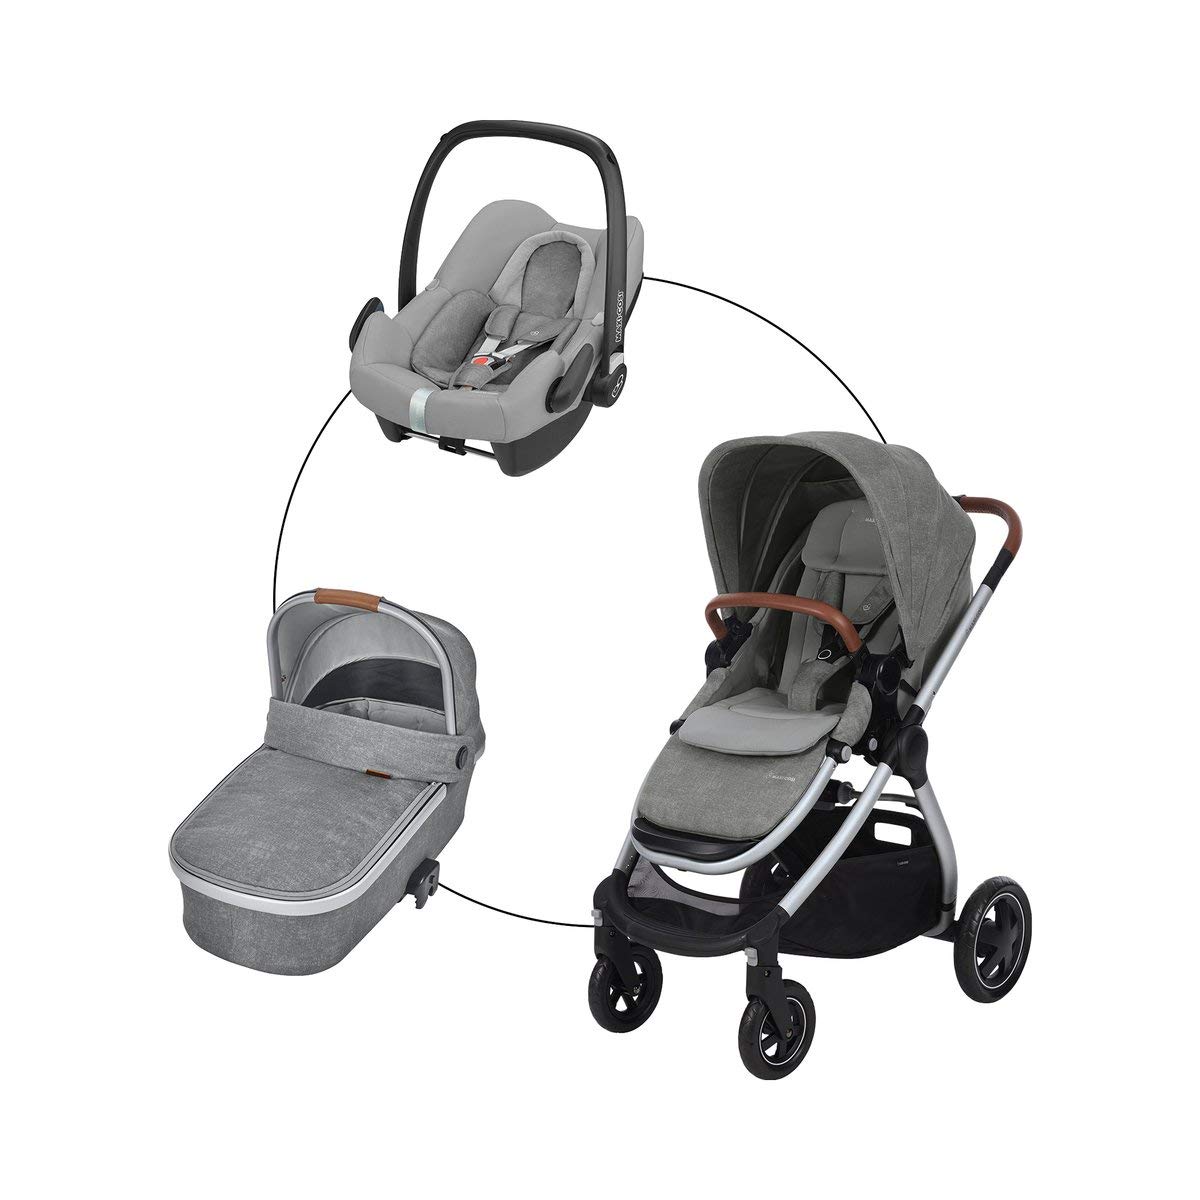 Maxi-Cosi Adorra Combi Pushchair (Trio Set) Pushchair with Sports Seat, Oria Pram Attachment & Rock Baby Seat for Babies & Toddlers up to 3.5 Years